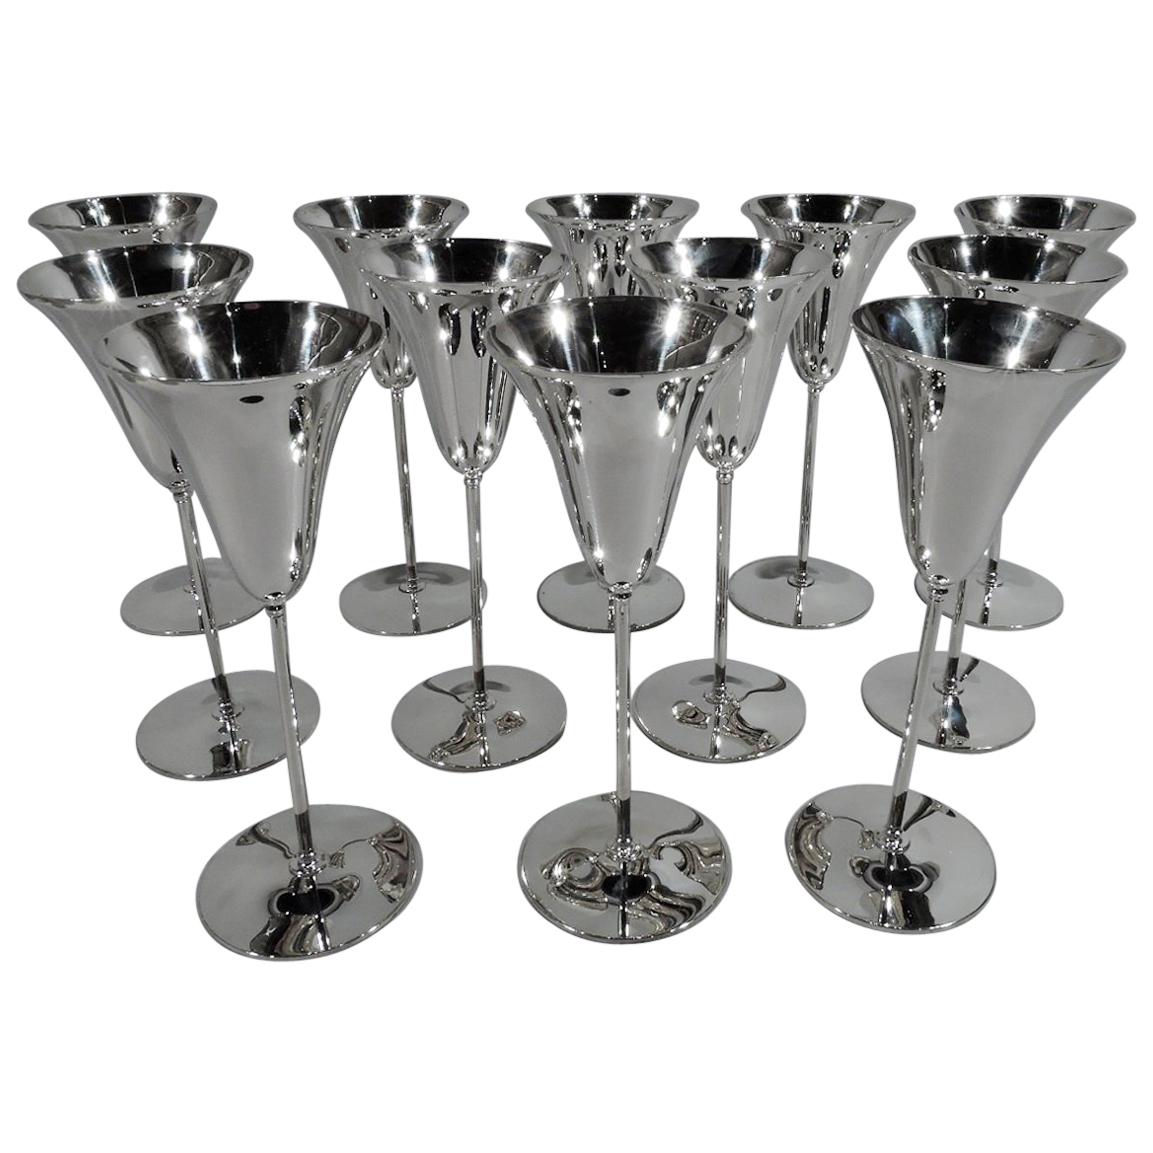 Set of 12 Tiffany Modern Sterling Silver Chic Champagne Tulip Flutes